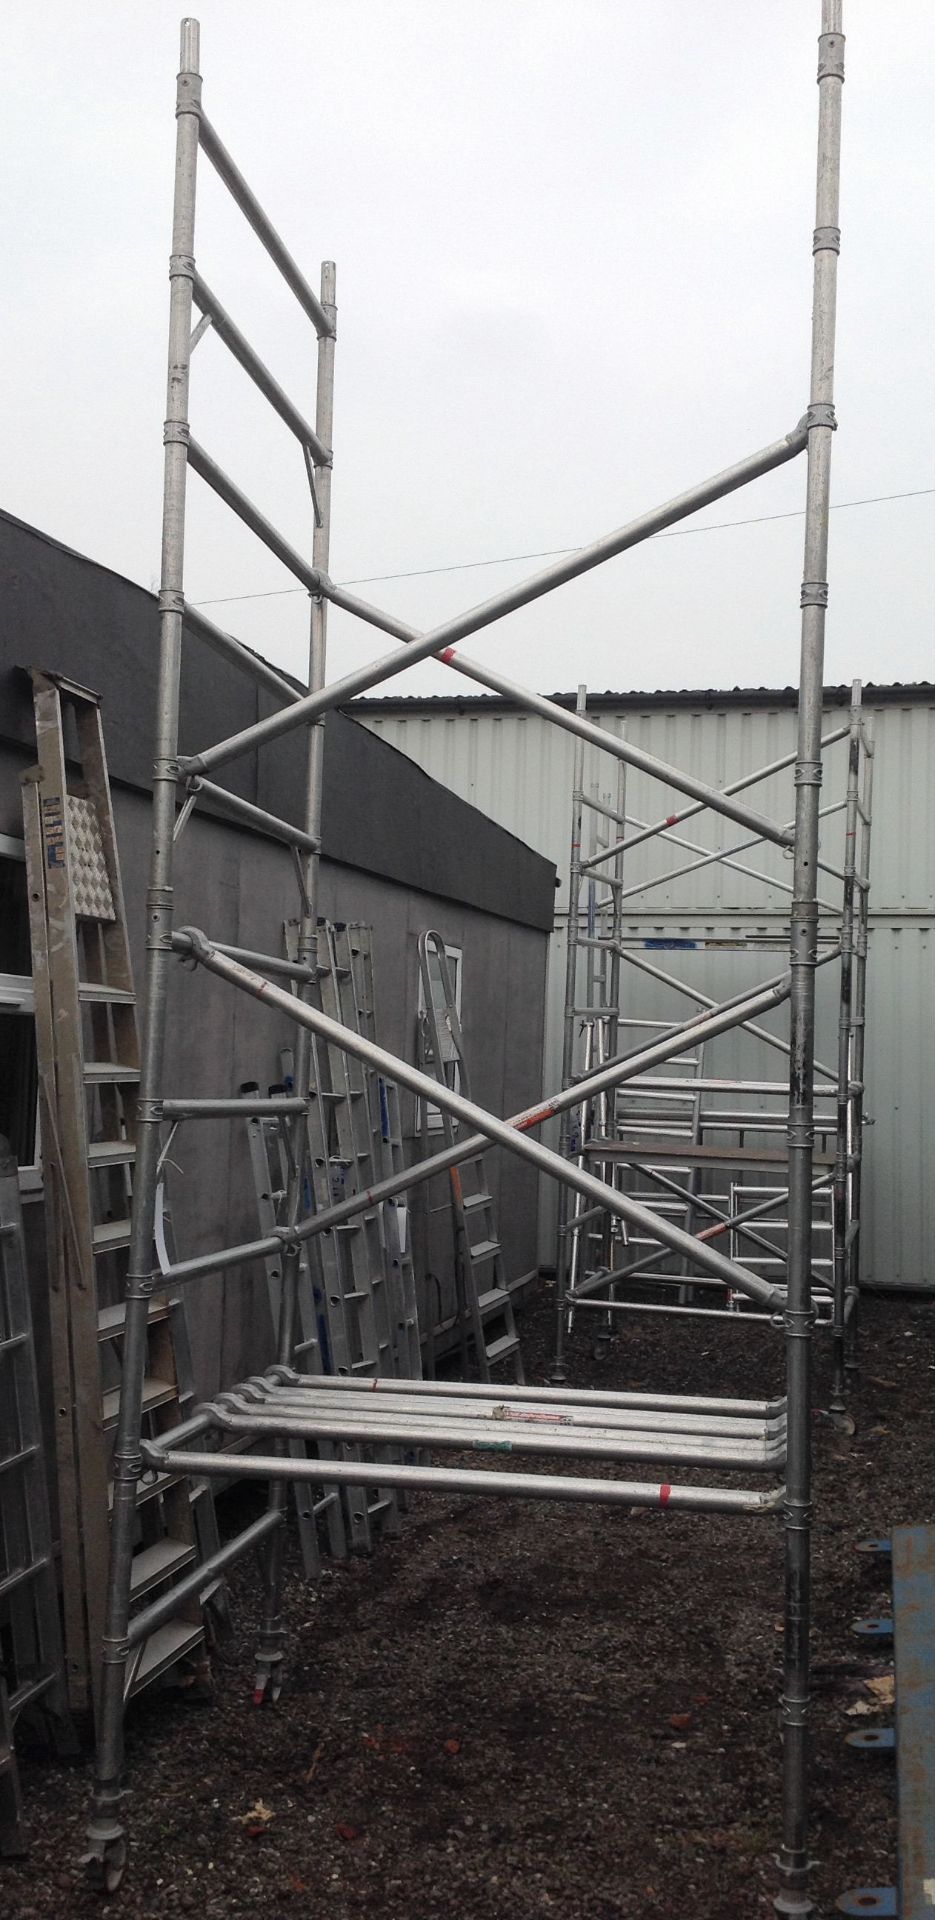 A Youngman Tubular Steel Mobile Scaffold Tower, 1.5m x 1.3m x 5m h.